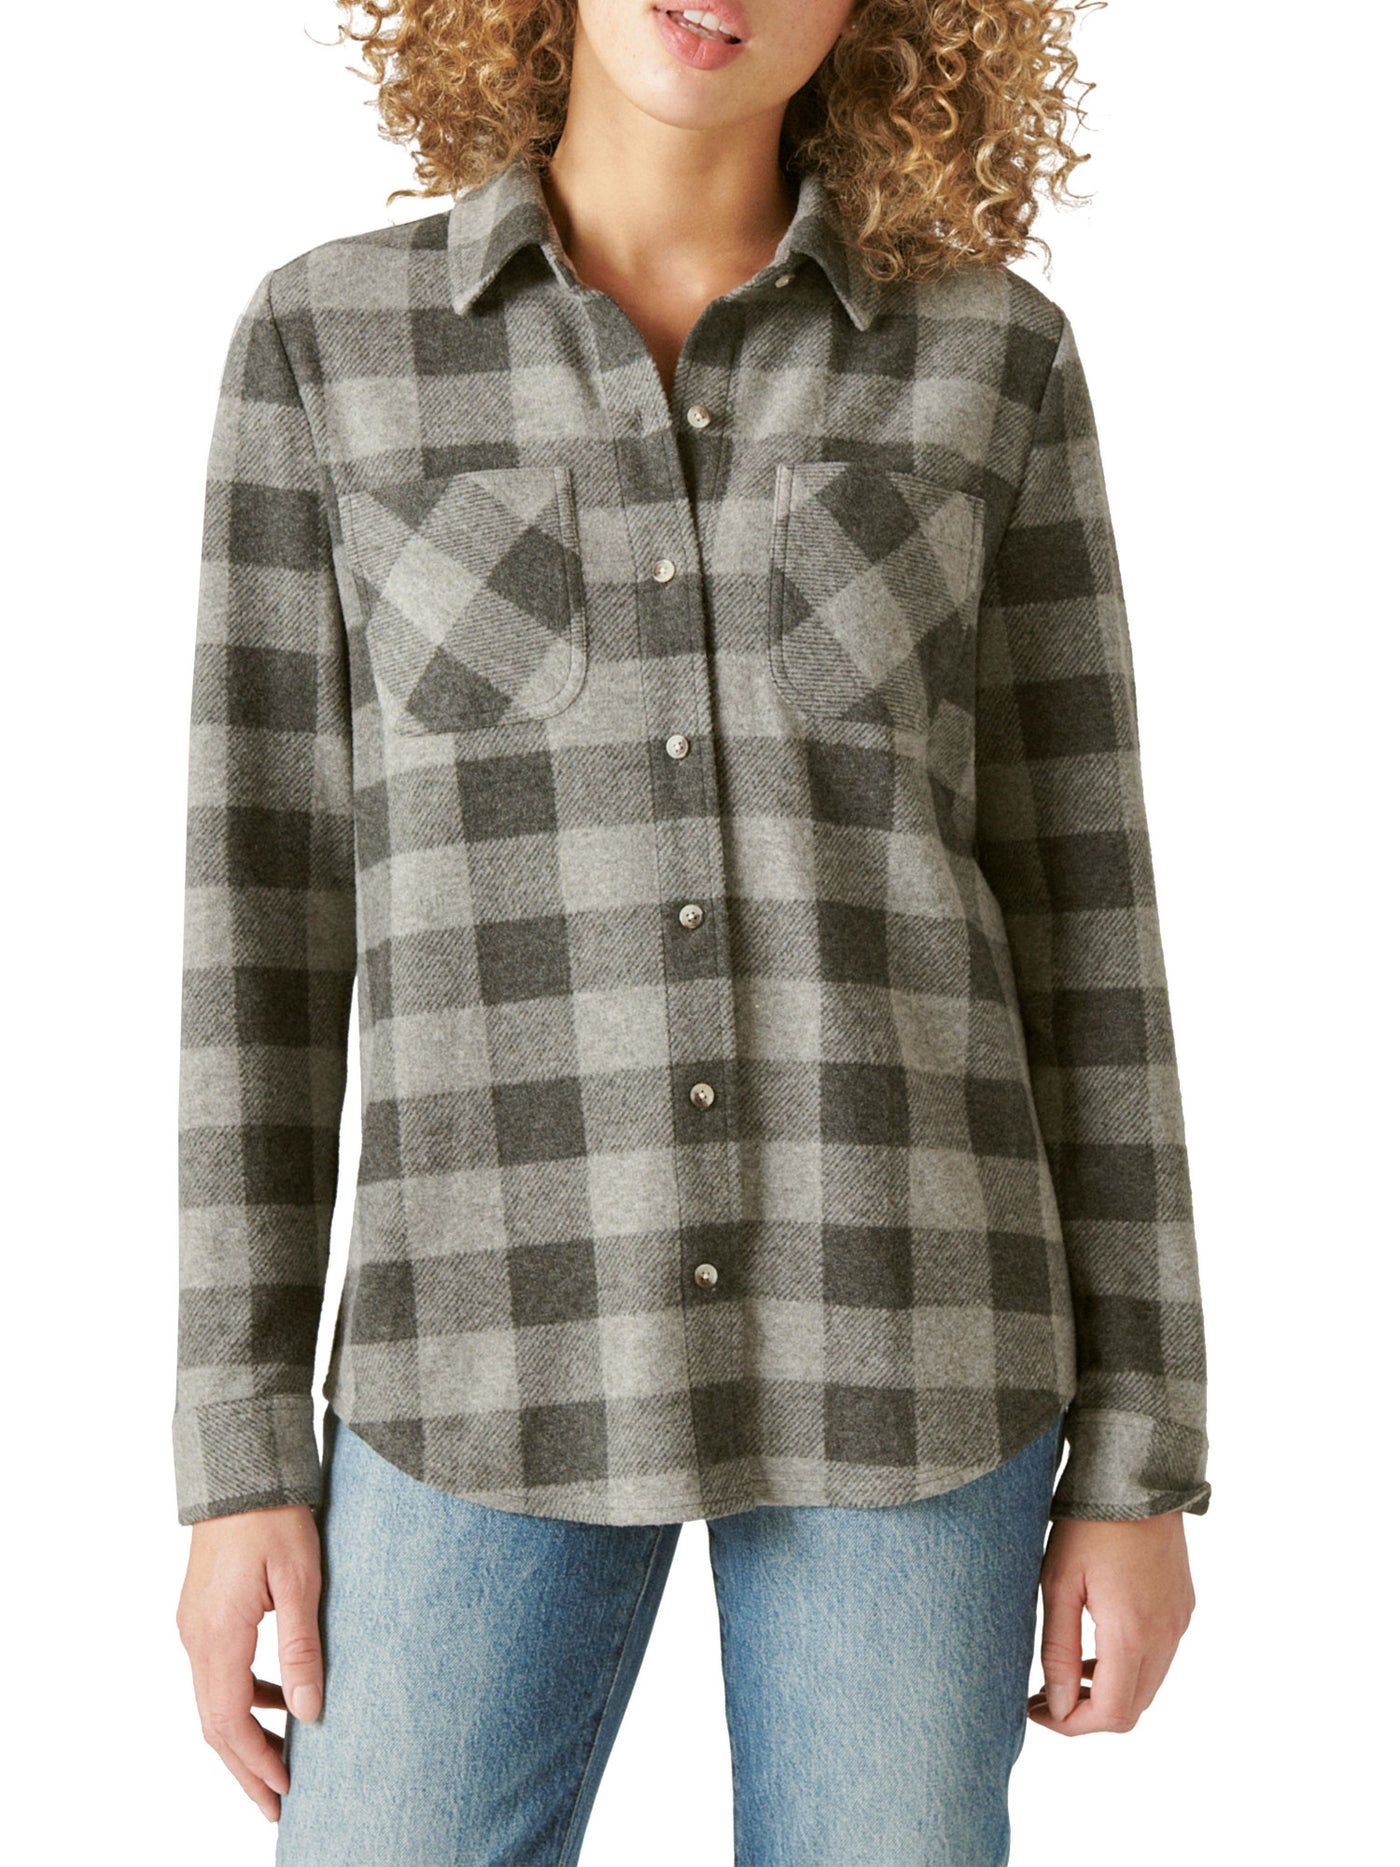 LUCKY BRAND Womens Gray Pocketed Pleated Boyfriend Curved Hem Plaid Cuffed Sleeve Collared Button Up Top M